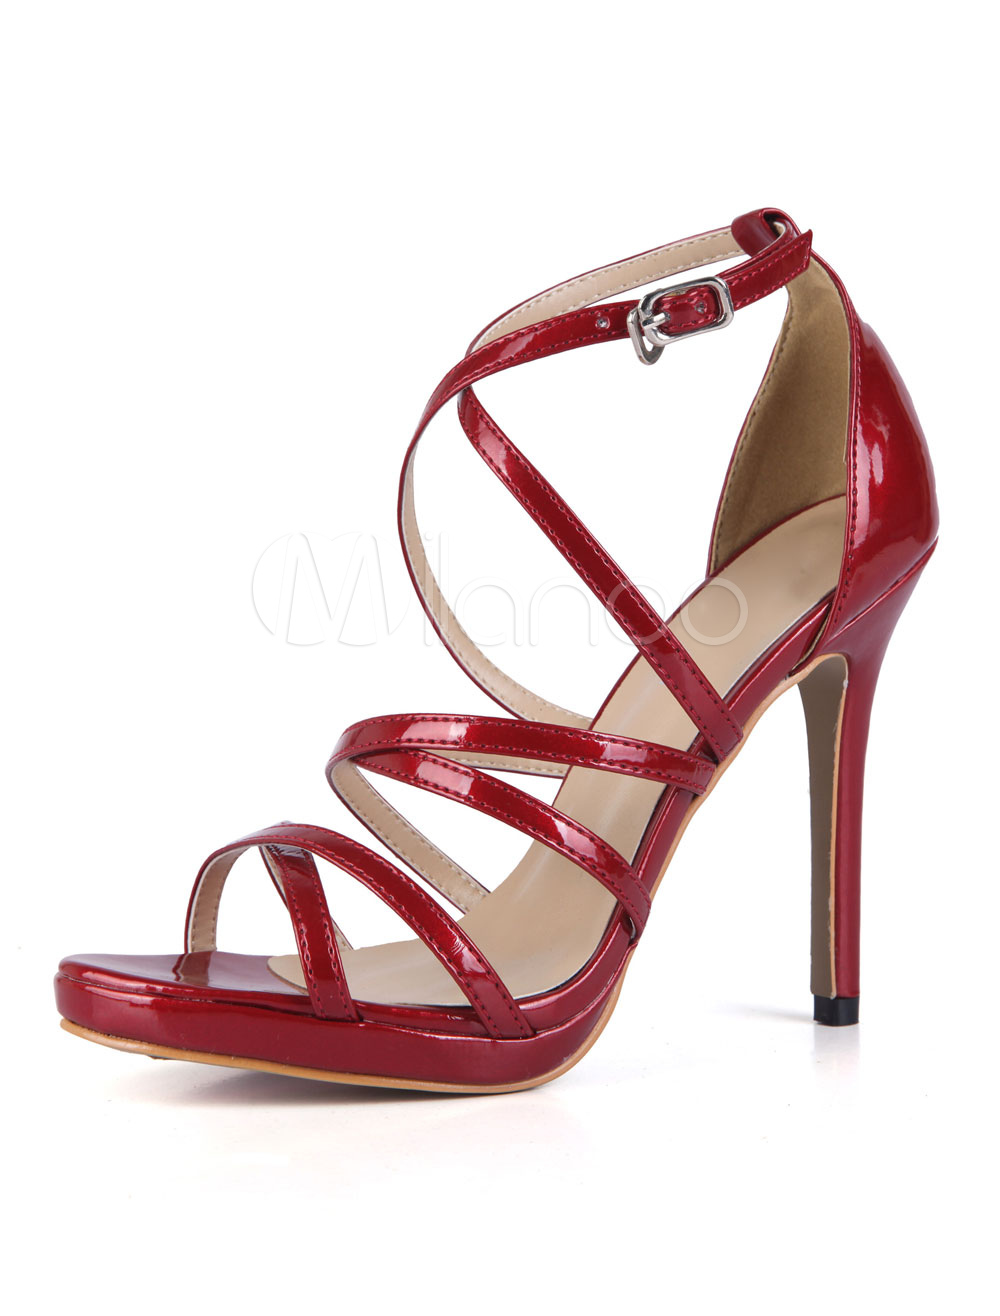 burgundy strappy shoes